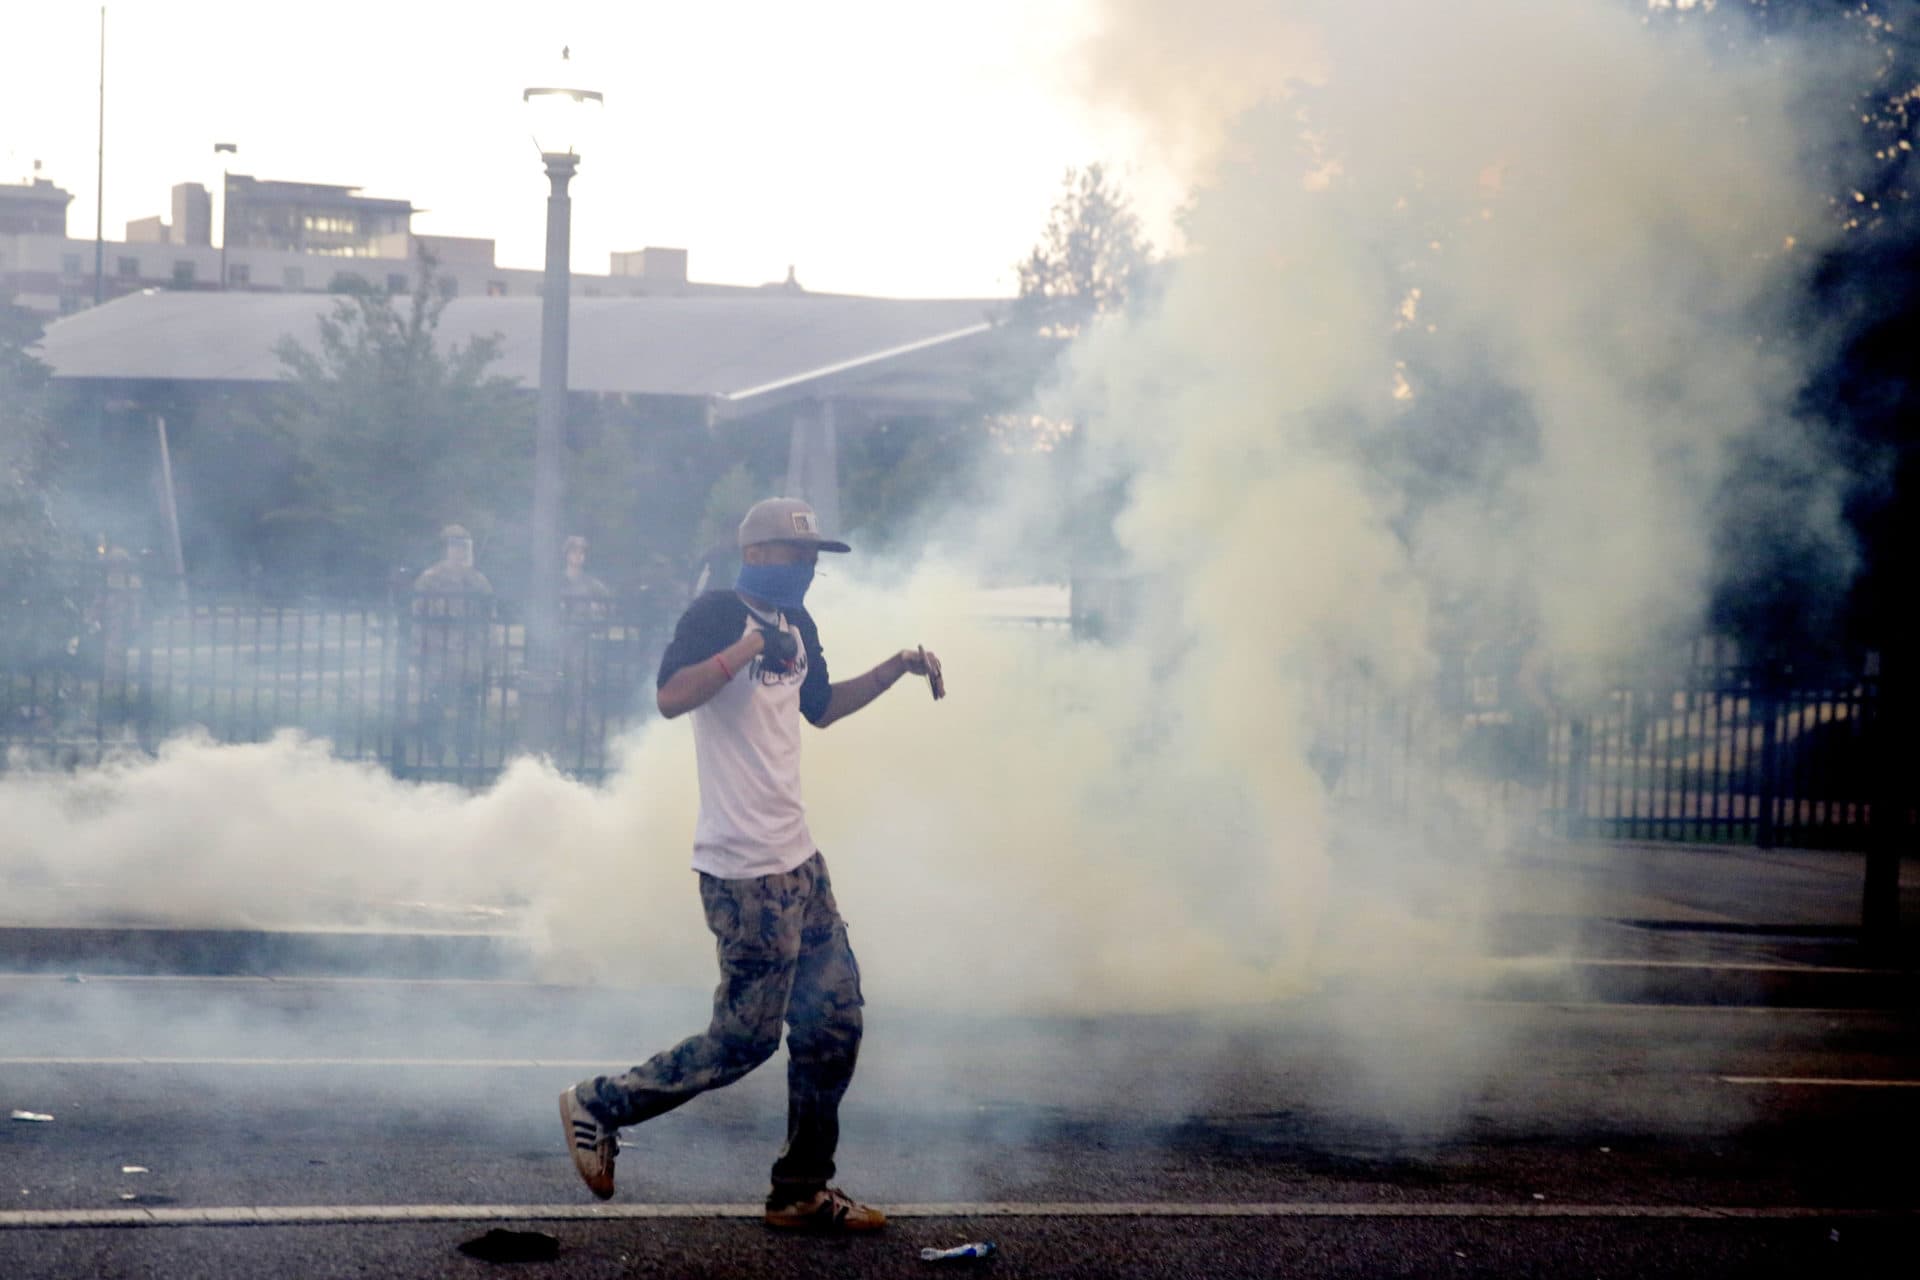 Demonstrators protest in a fog of gas that the Atlanta Police launched at a crowd, Saturday, May 30, 2020 in Atlanta. (AP Photo/Brynn Anderson)